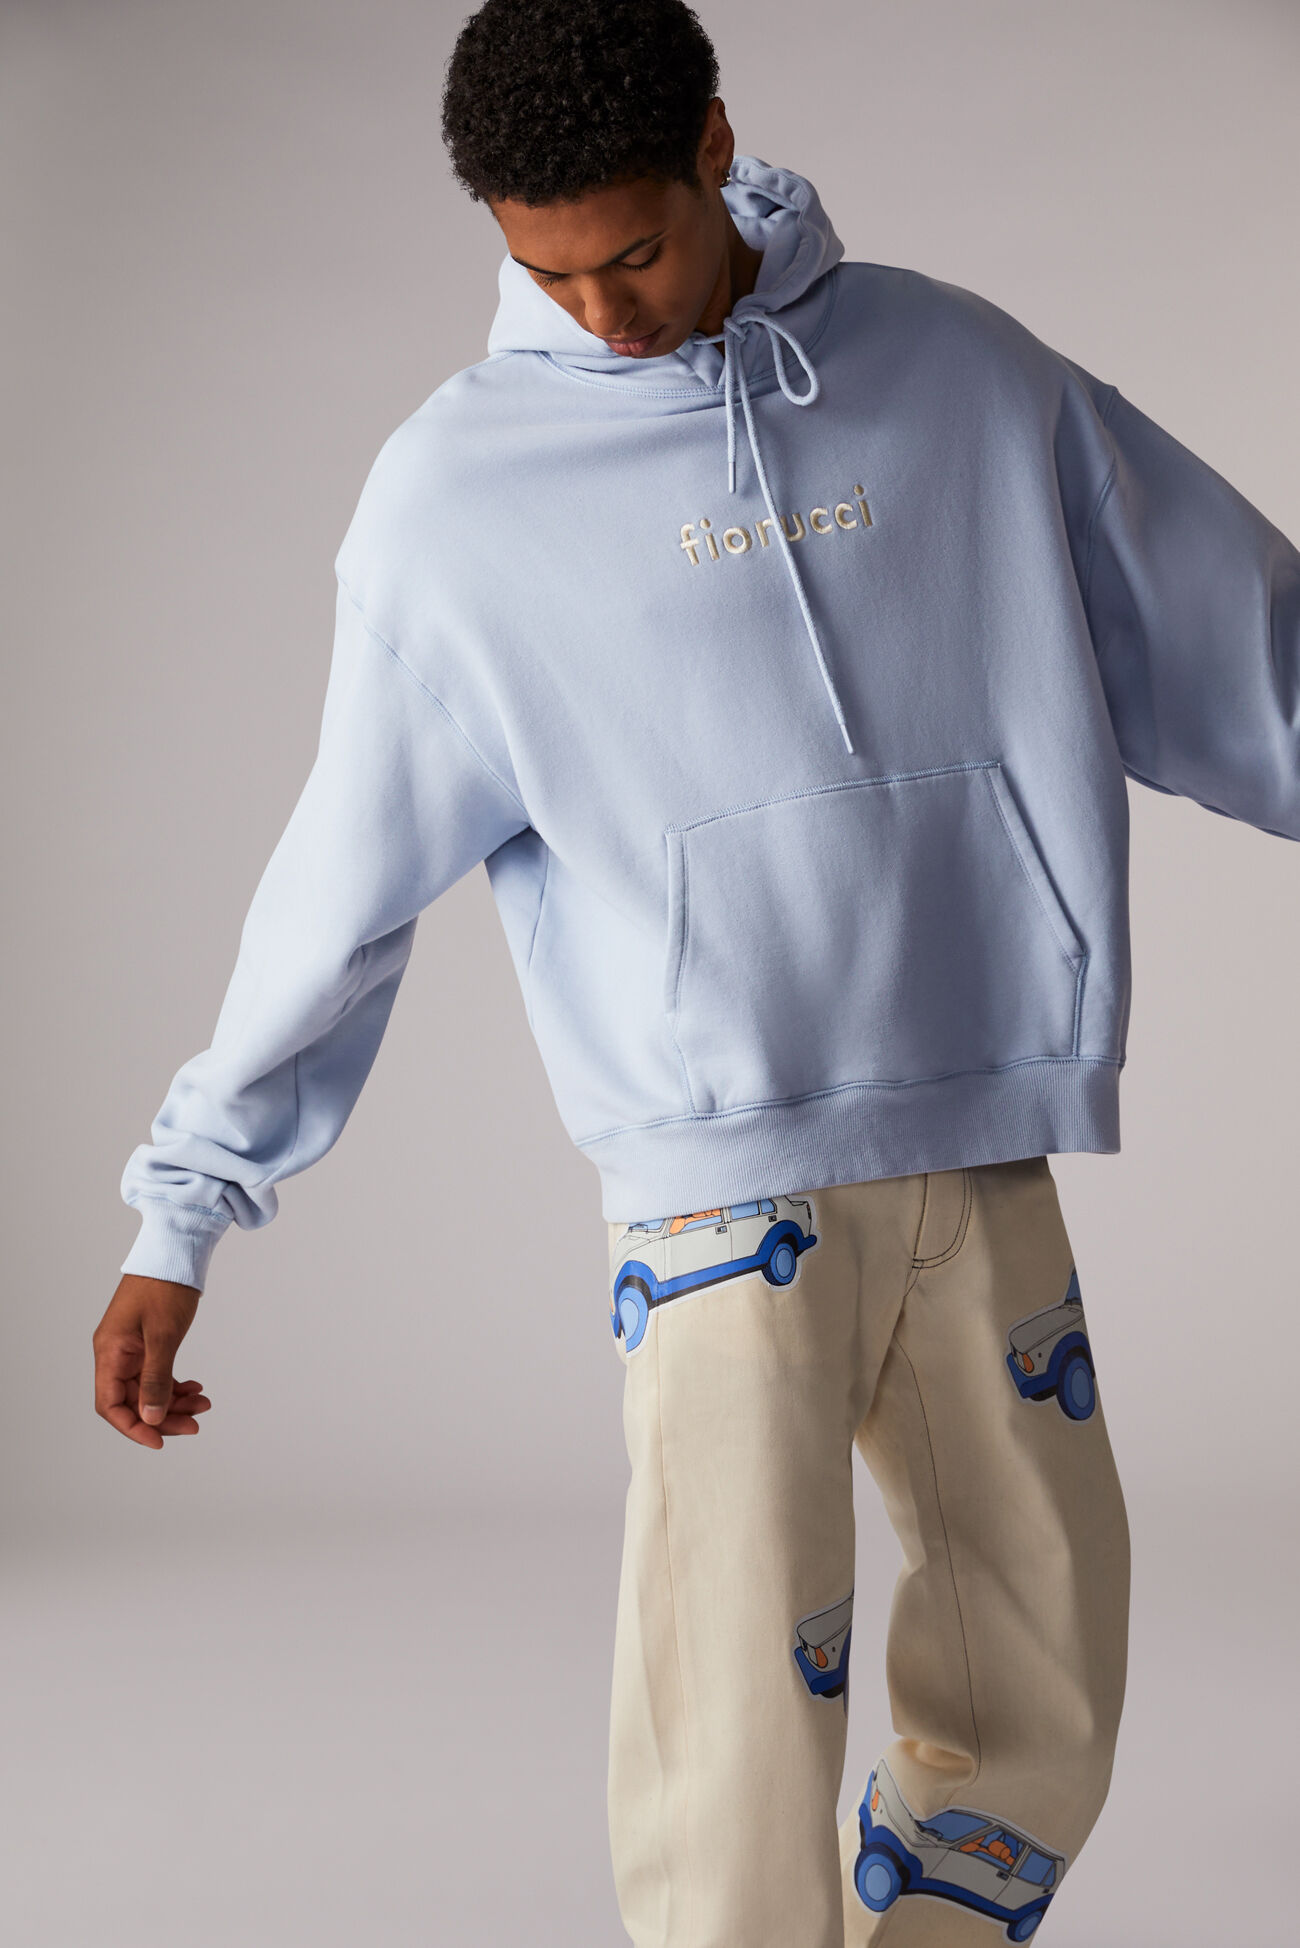 Embroidered Logo Hoodie Blue